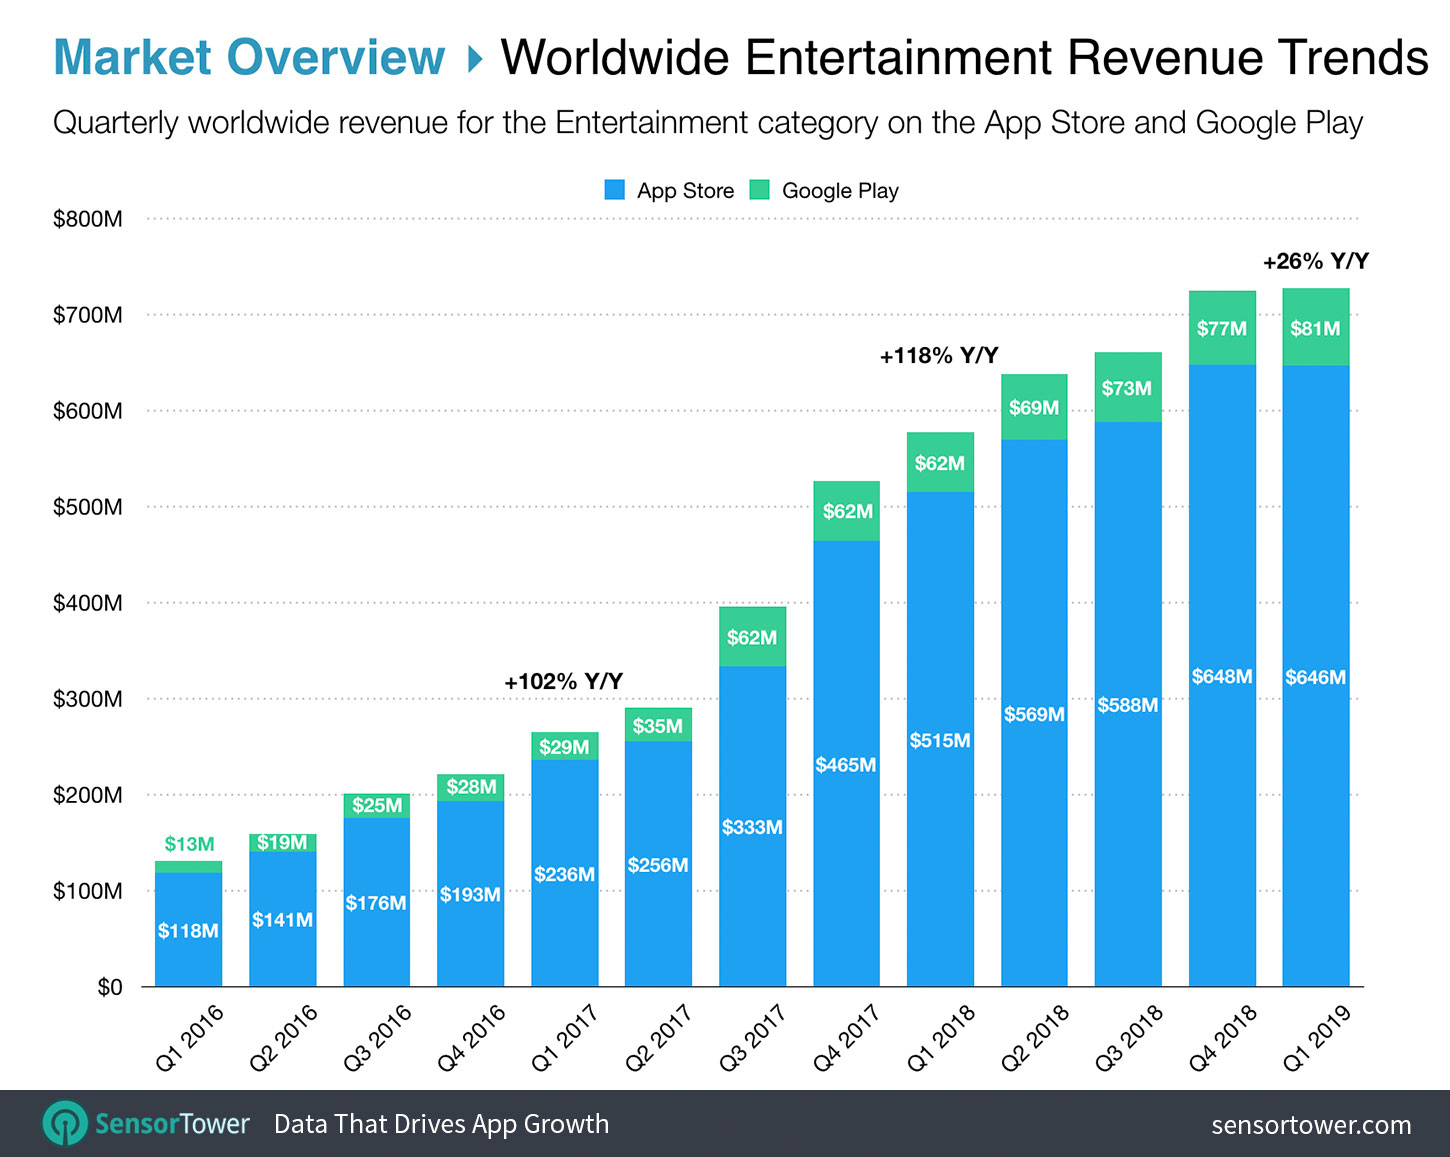 Worldwide Entertainment App Revenue Trends from 2016 to 2019